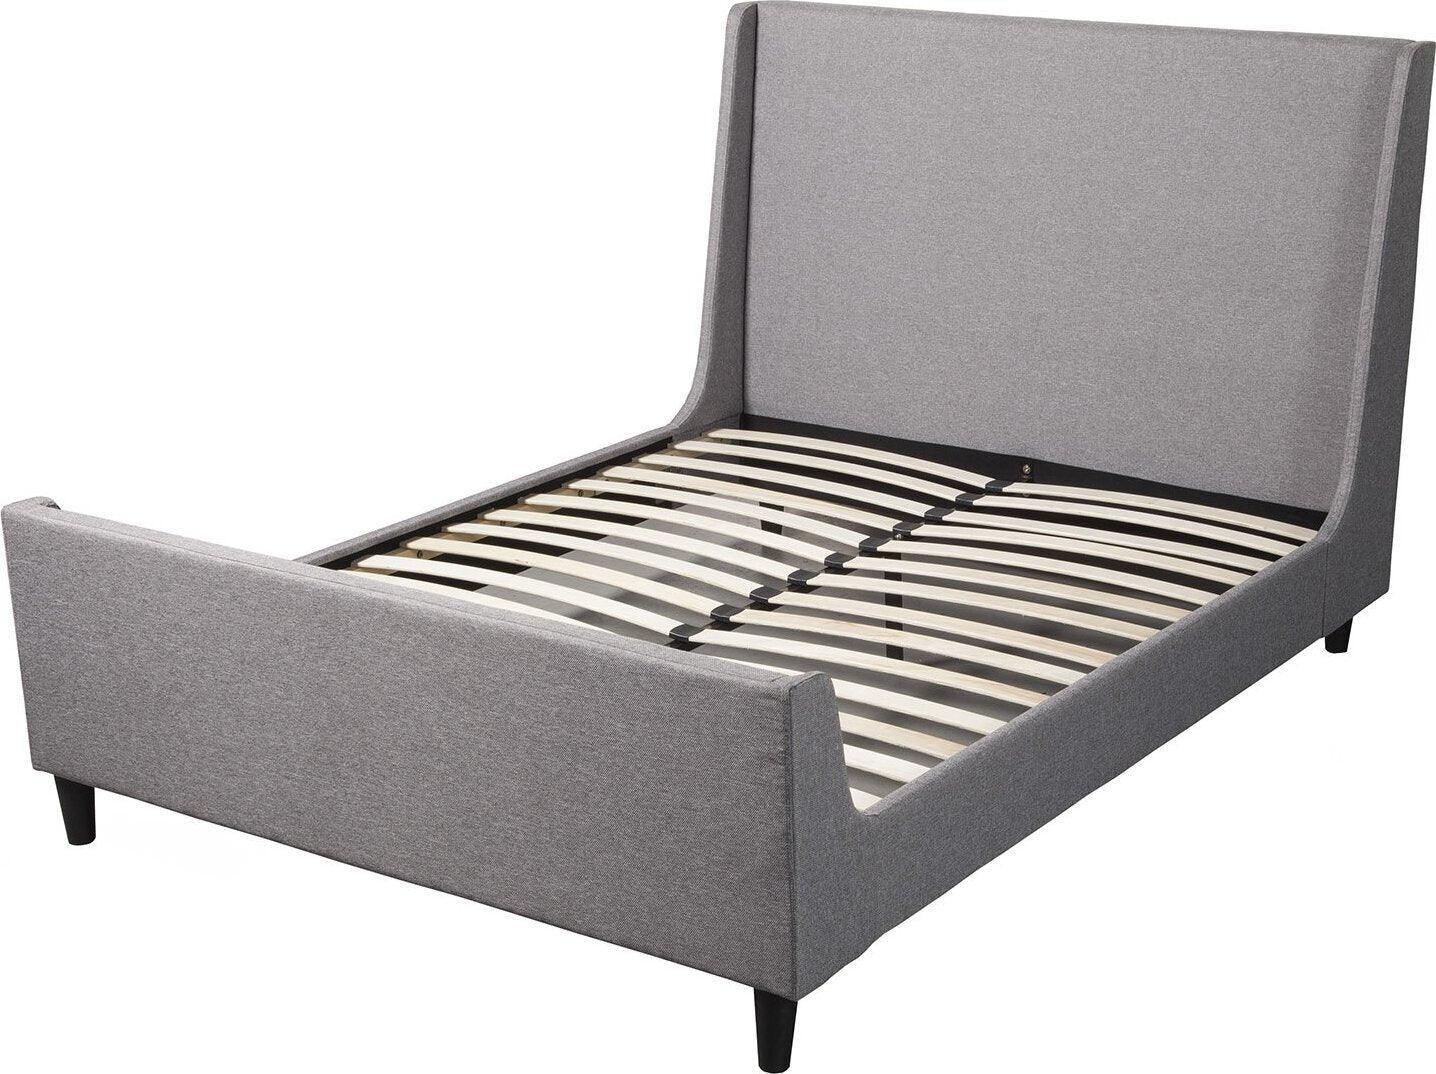 Alpine Furniture Beds - Amber California King Upholstered Bed Gray Linen